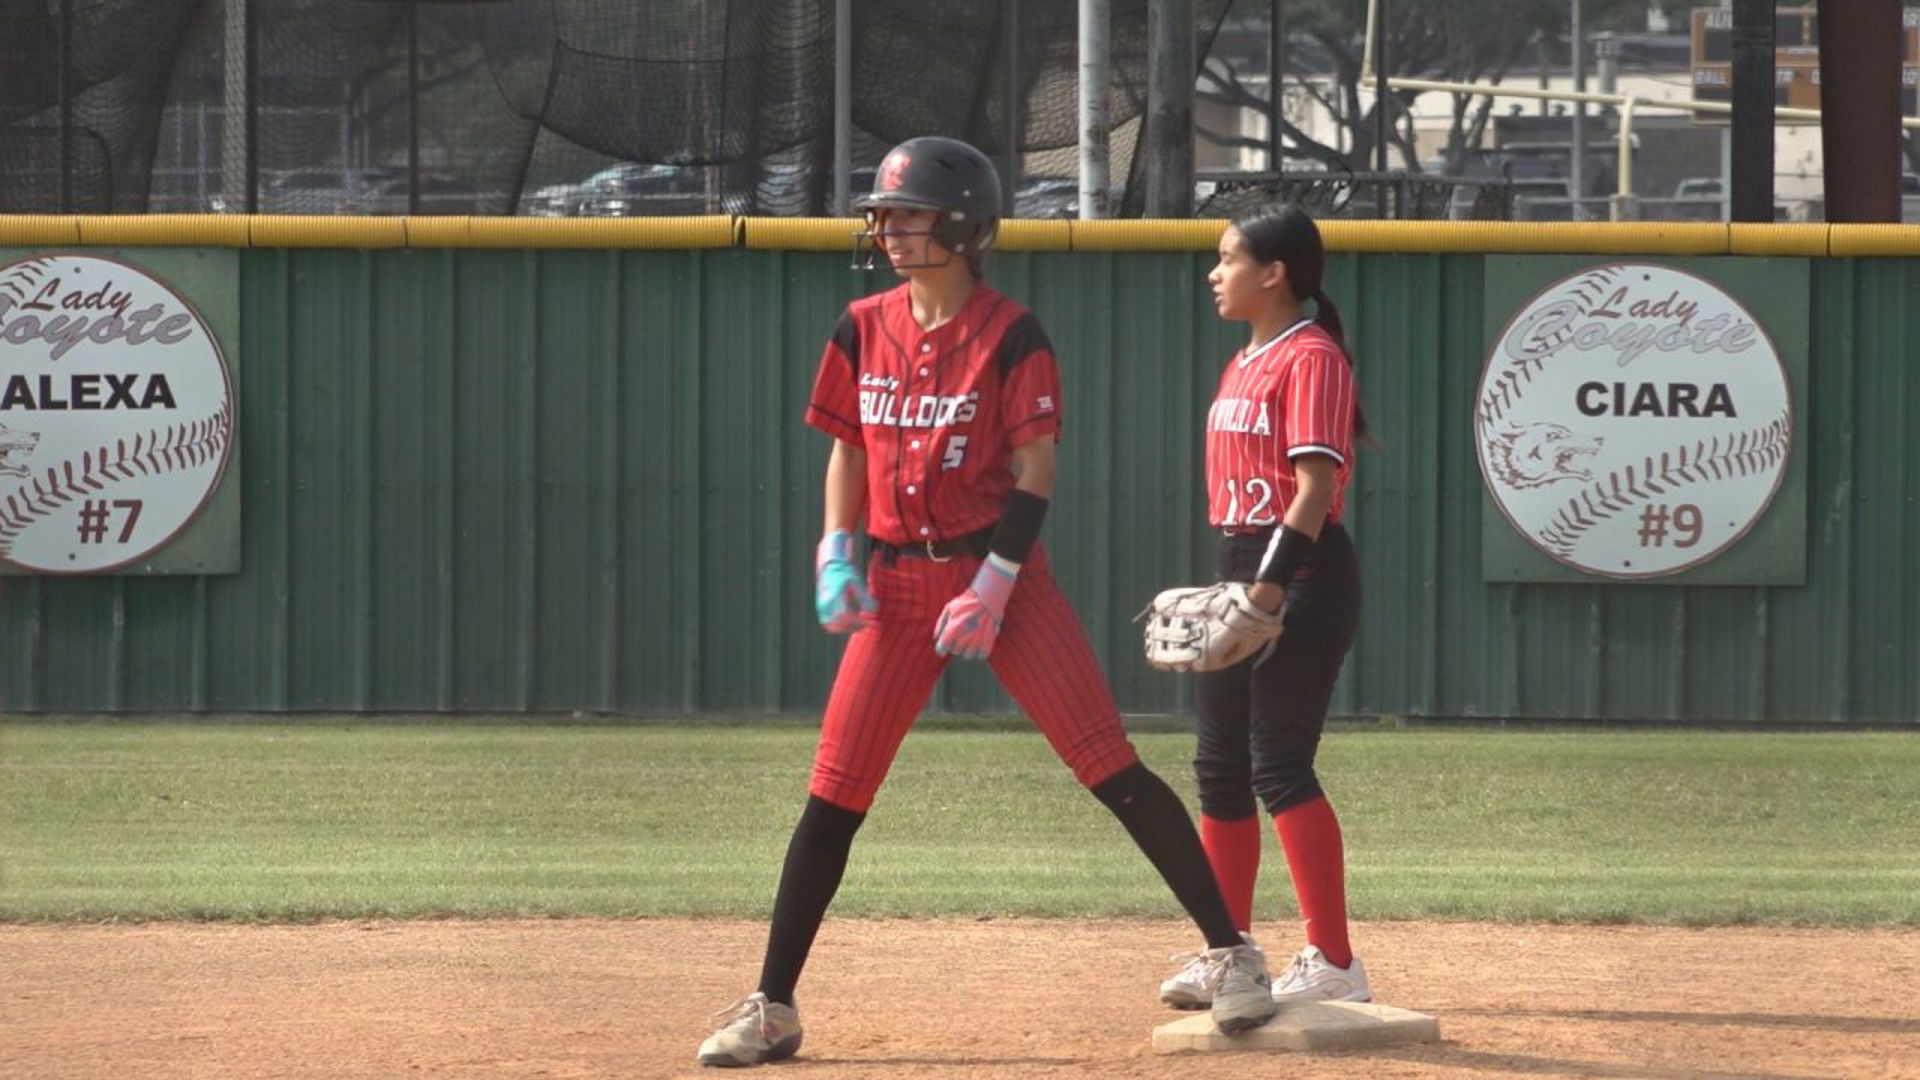 London handled Taft 16-0 in three innings while Three Rivers topped La Villa 9-2.